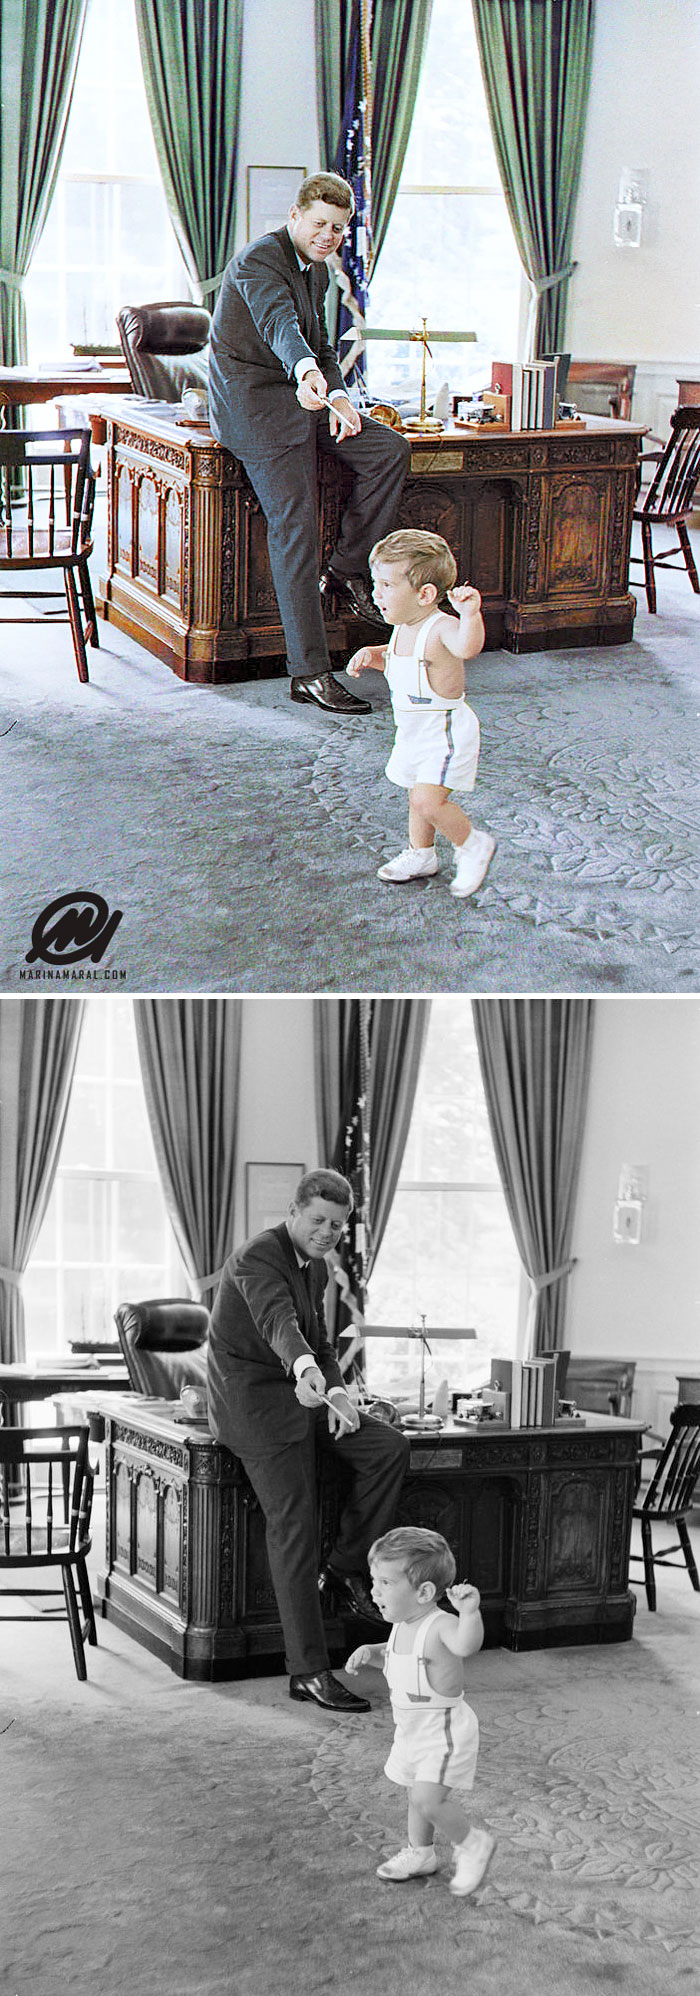 President John F. Kennedy With His Son, John F. Kennedy, Jr., In The Oval Office, White House, Washington, DC - 25 May 1962